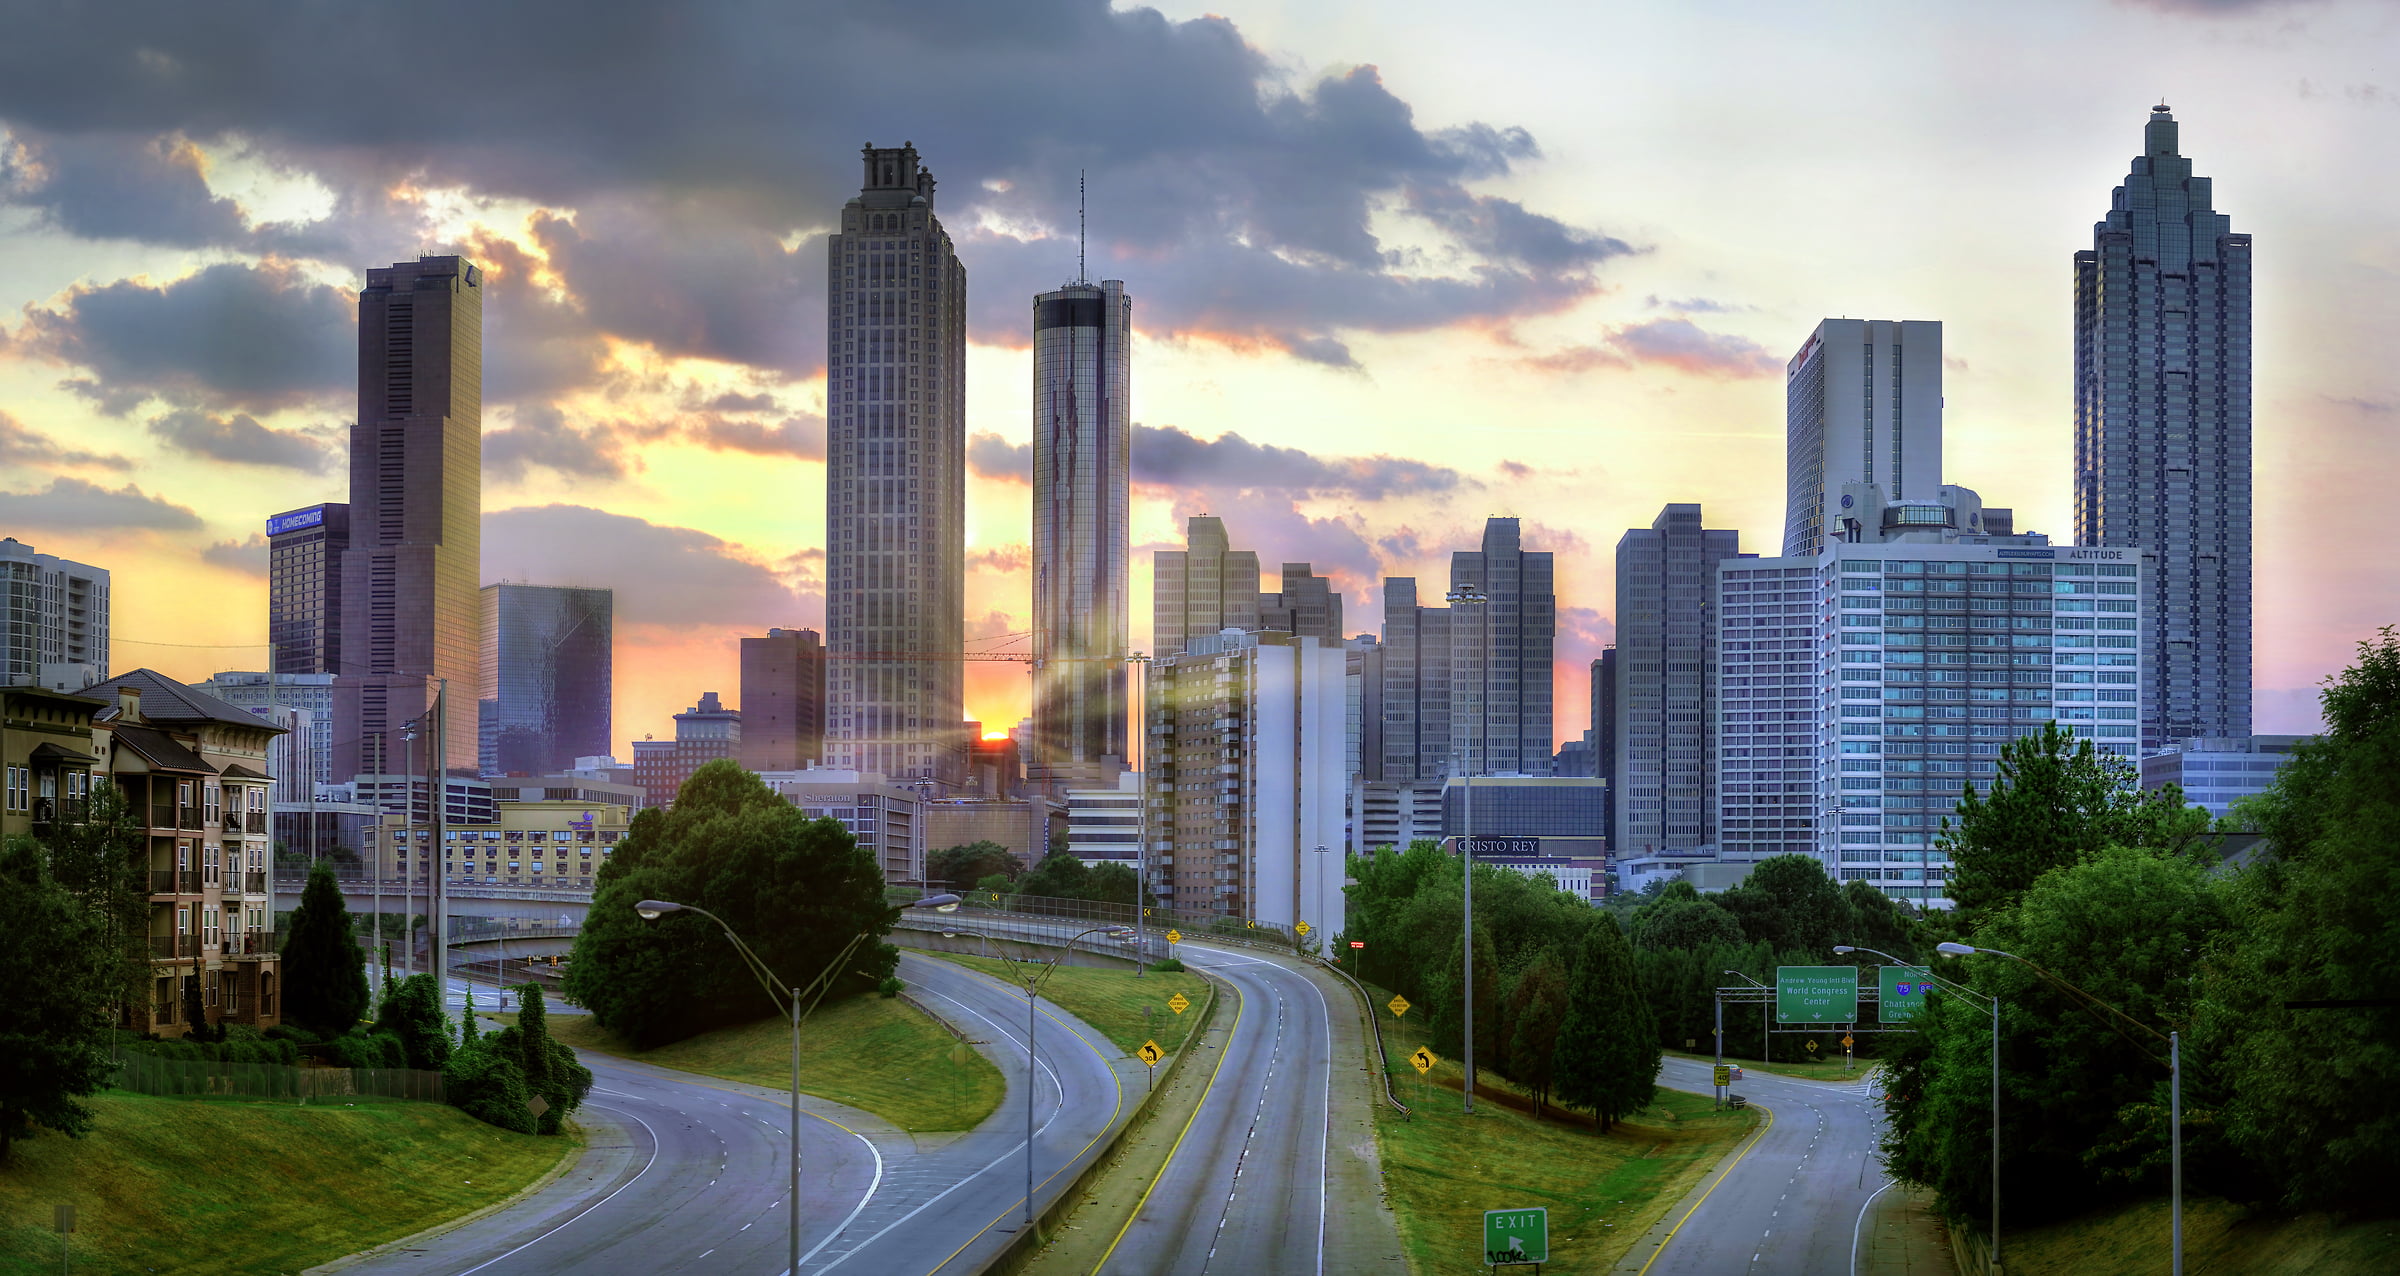 401 megapixels! A very high resolution, large-format VAST photo print of sunset over the downtown Atlanta skyline; cityscape photograph created by Phil Crawshay in Atlanta, Georgia